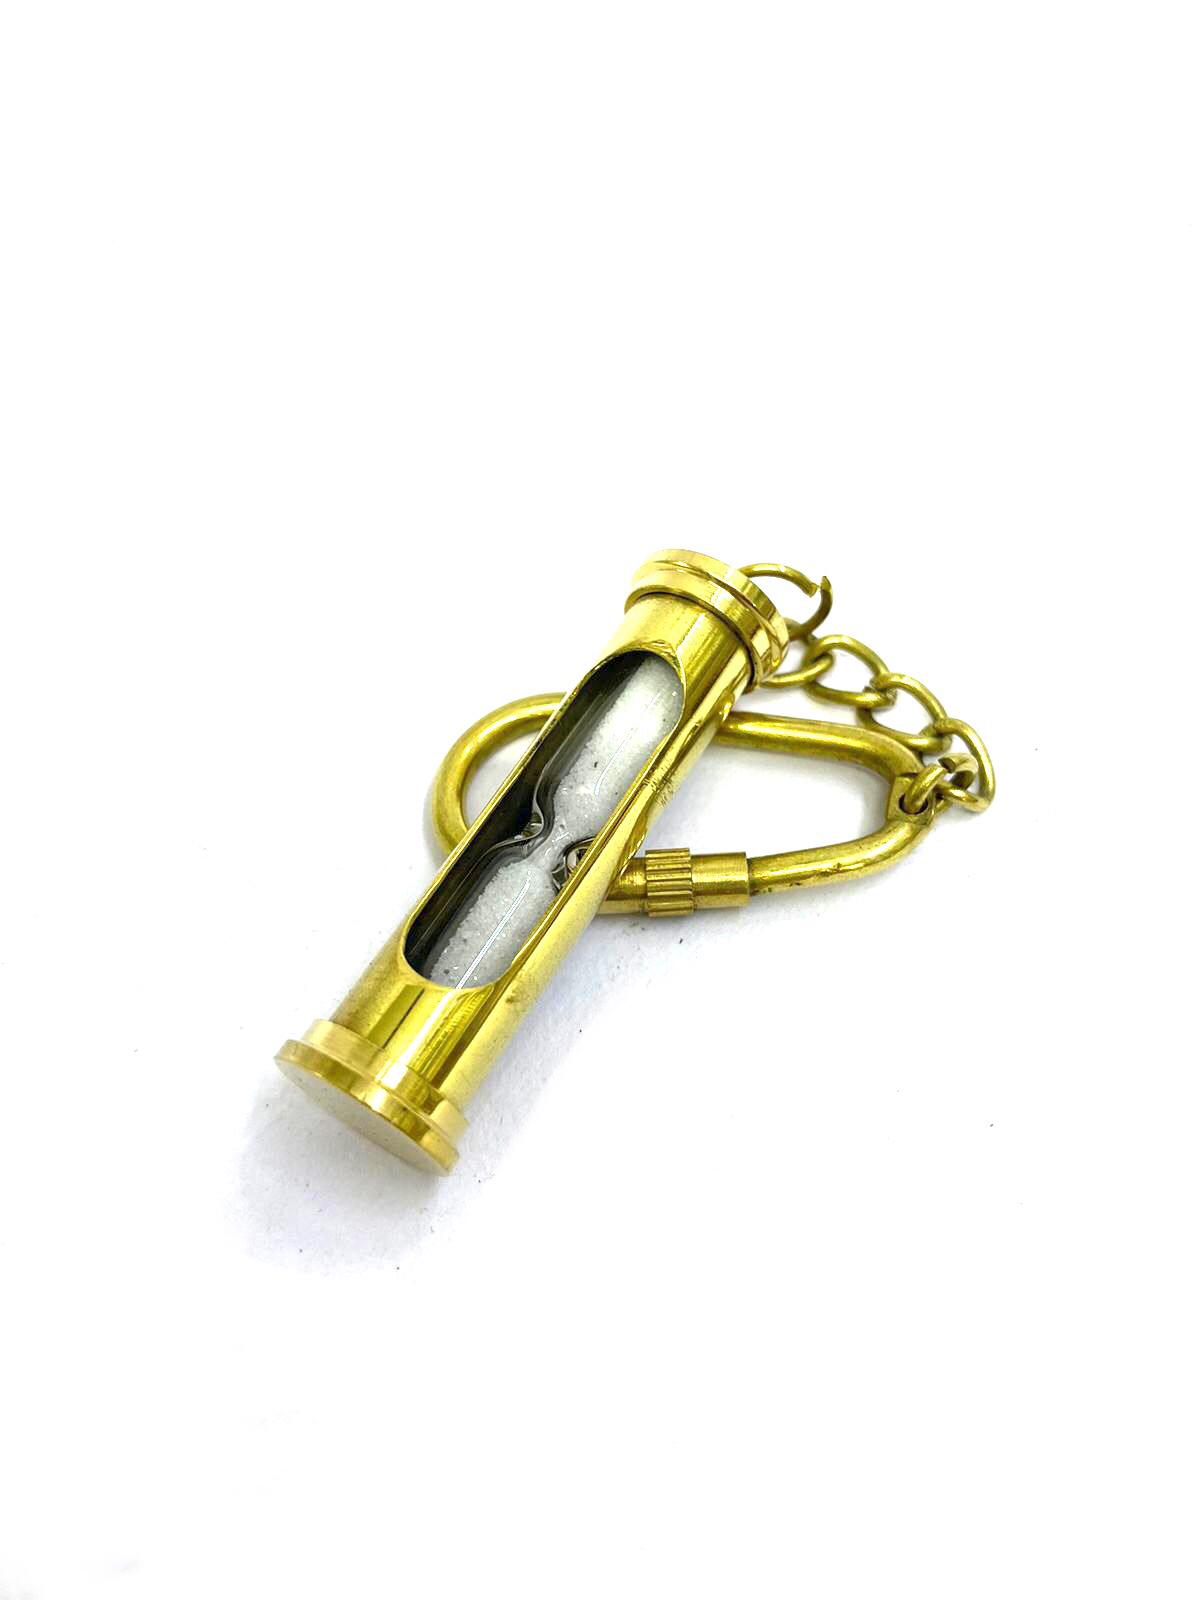 Brass Sand Timer Keychains Attractive Collectible Unique Artwork By Tamrapatra